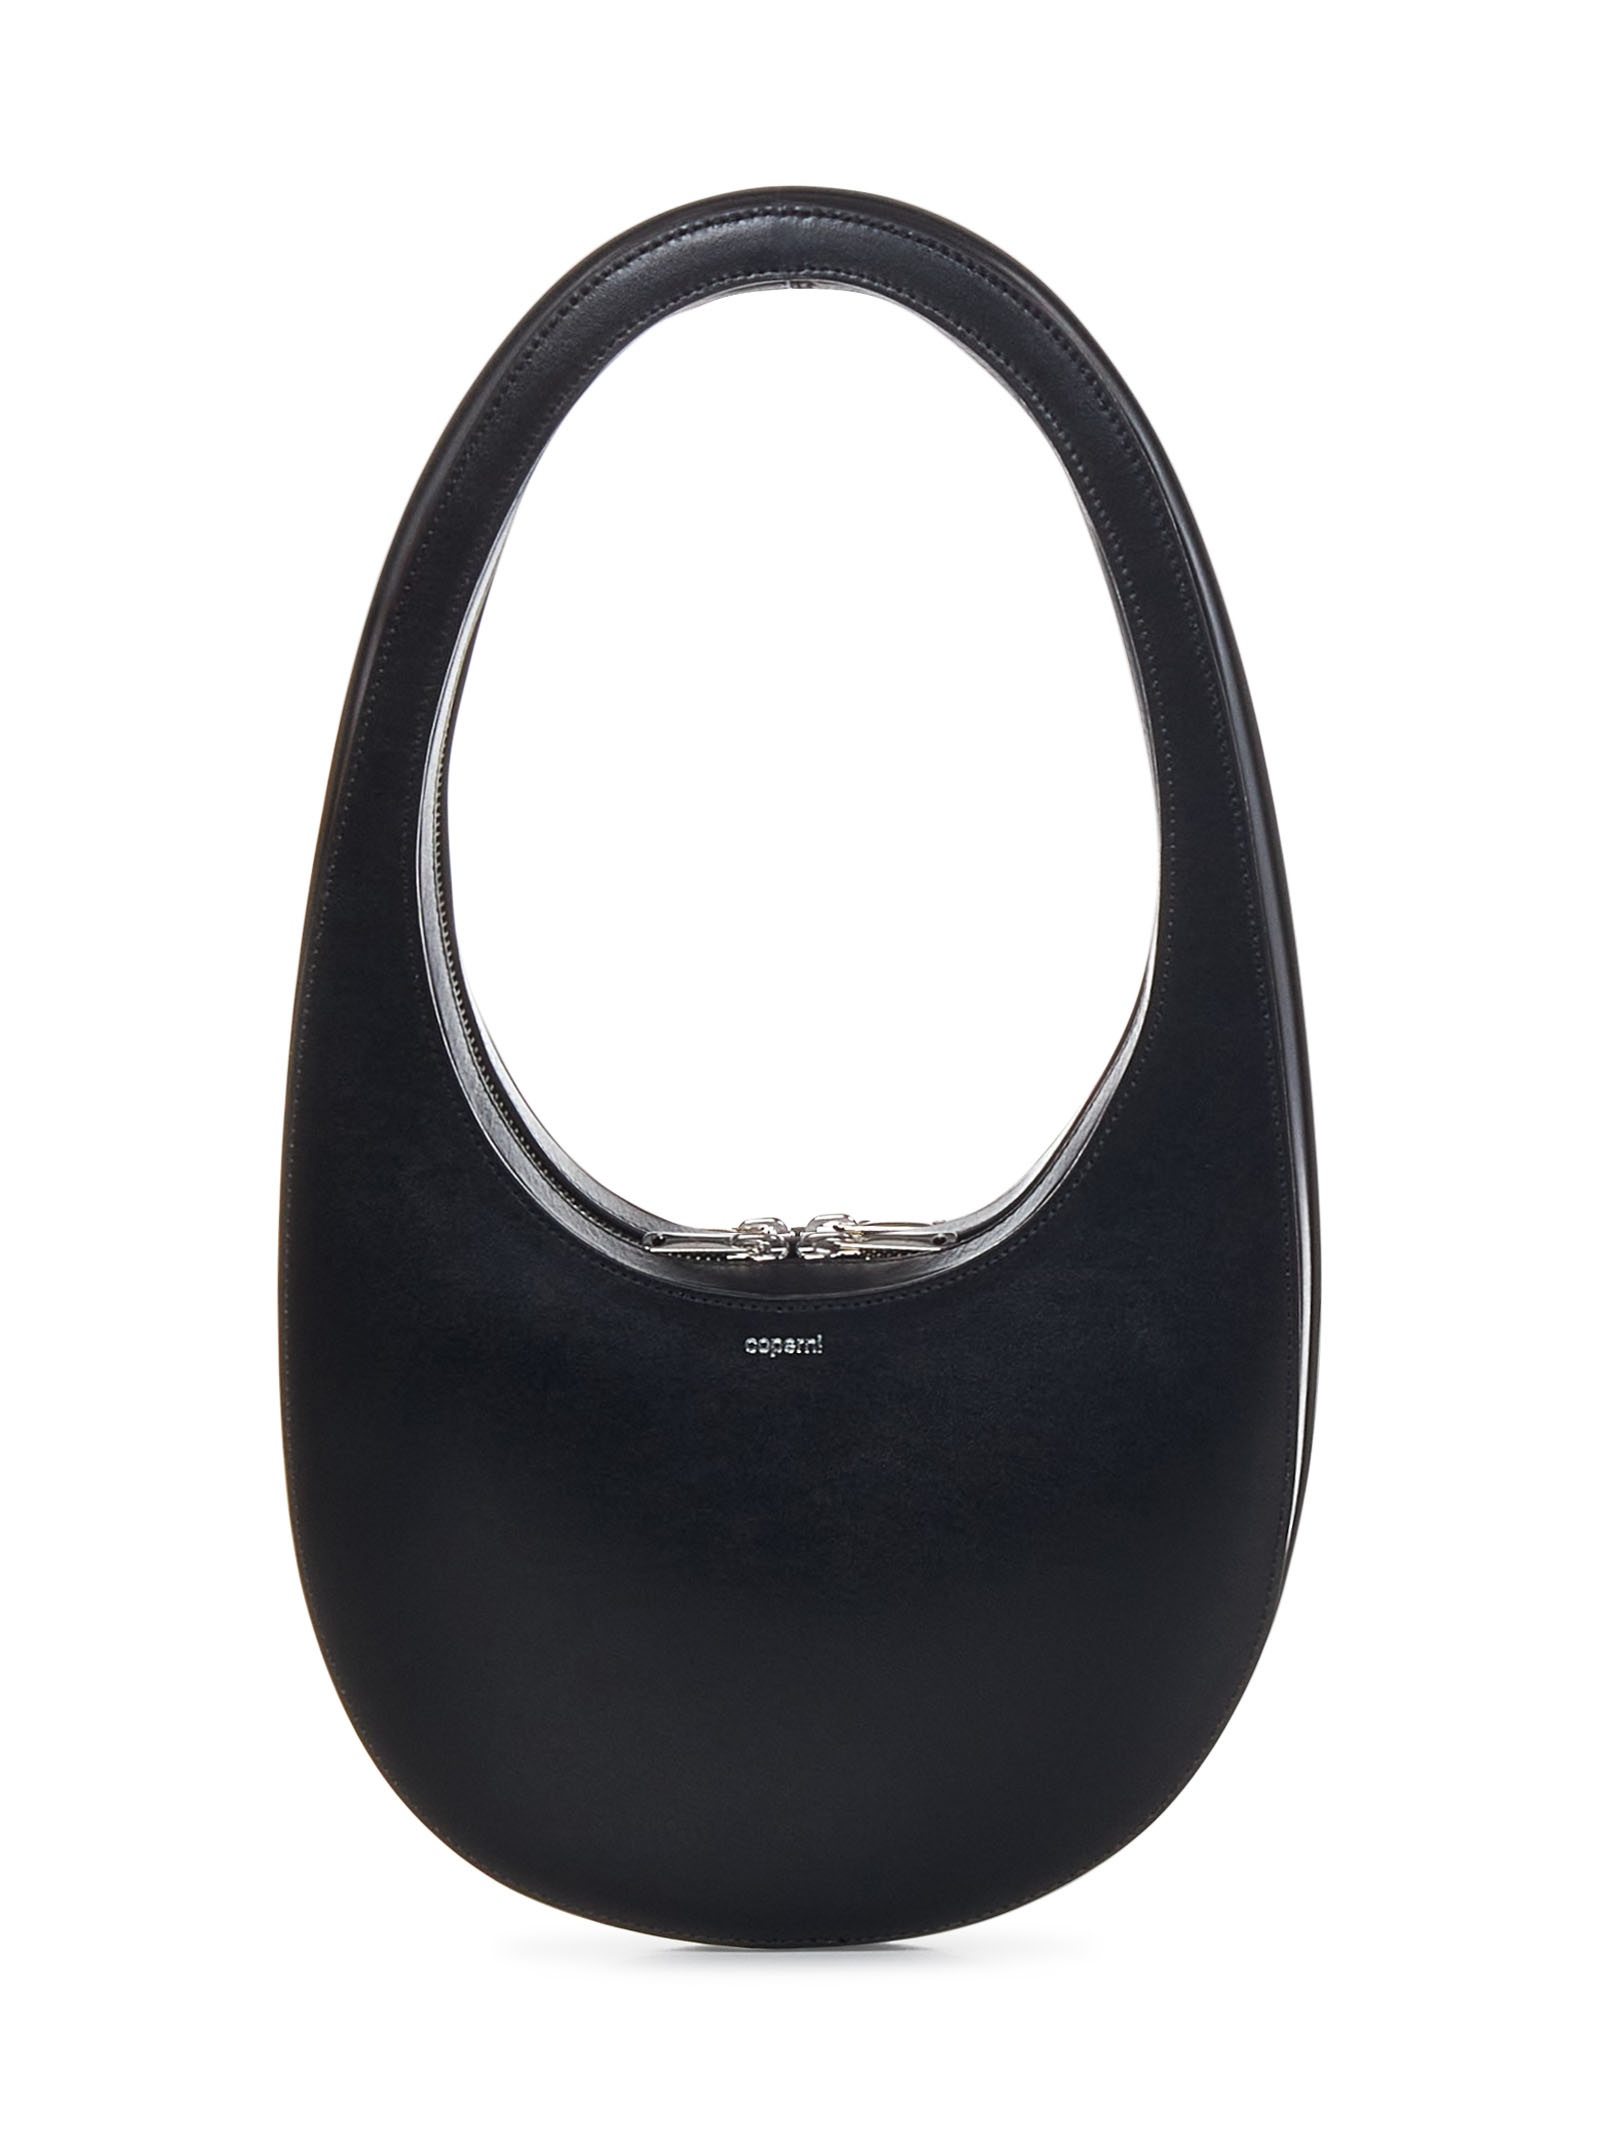 Oval handbag in black leather with silver logo print on the front. - 1